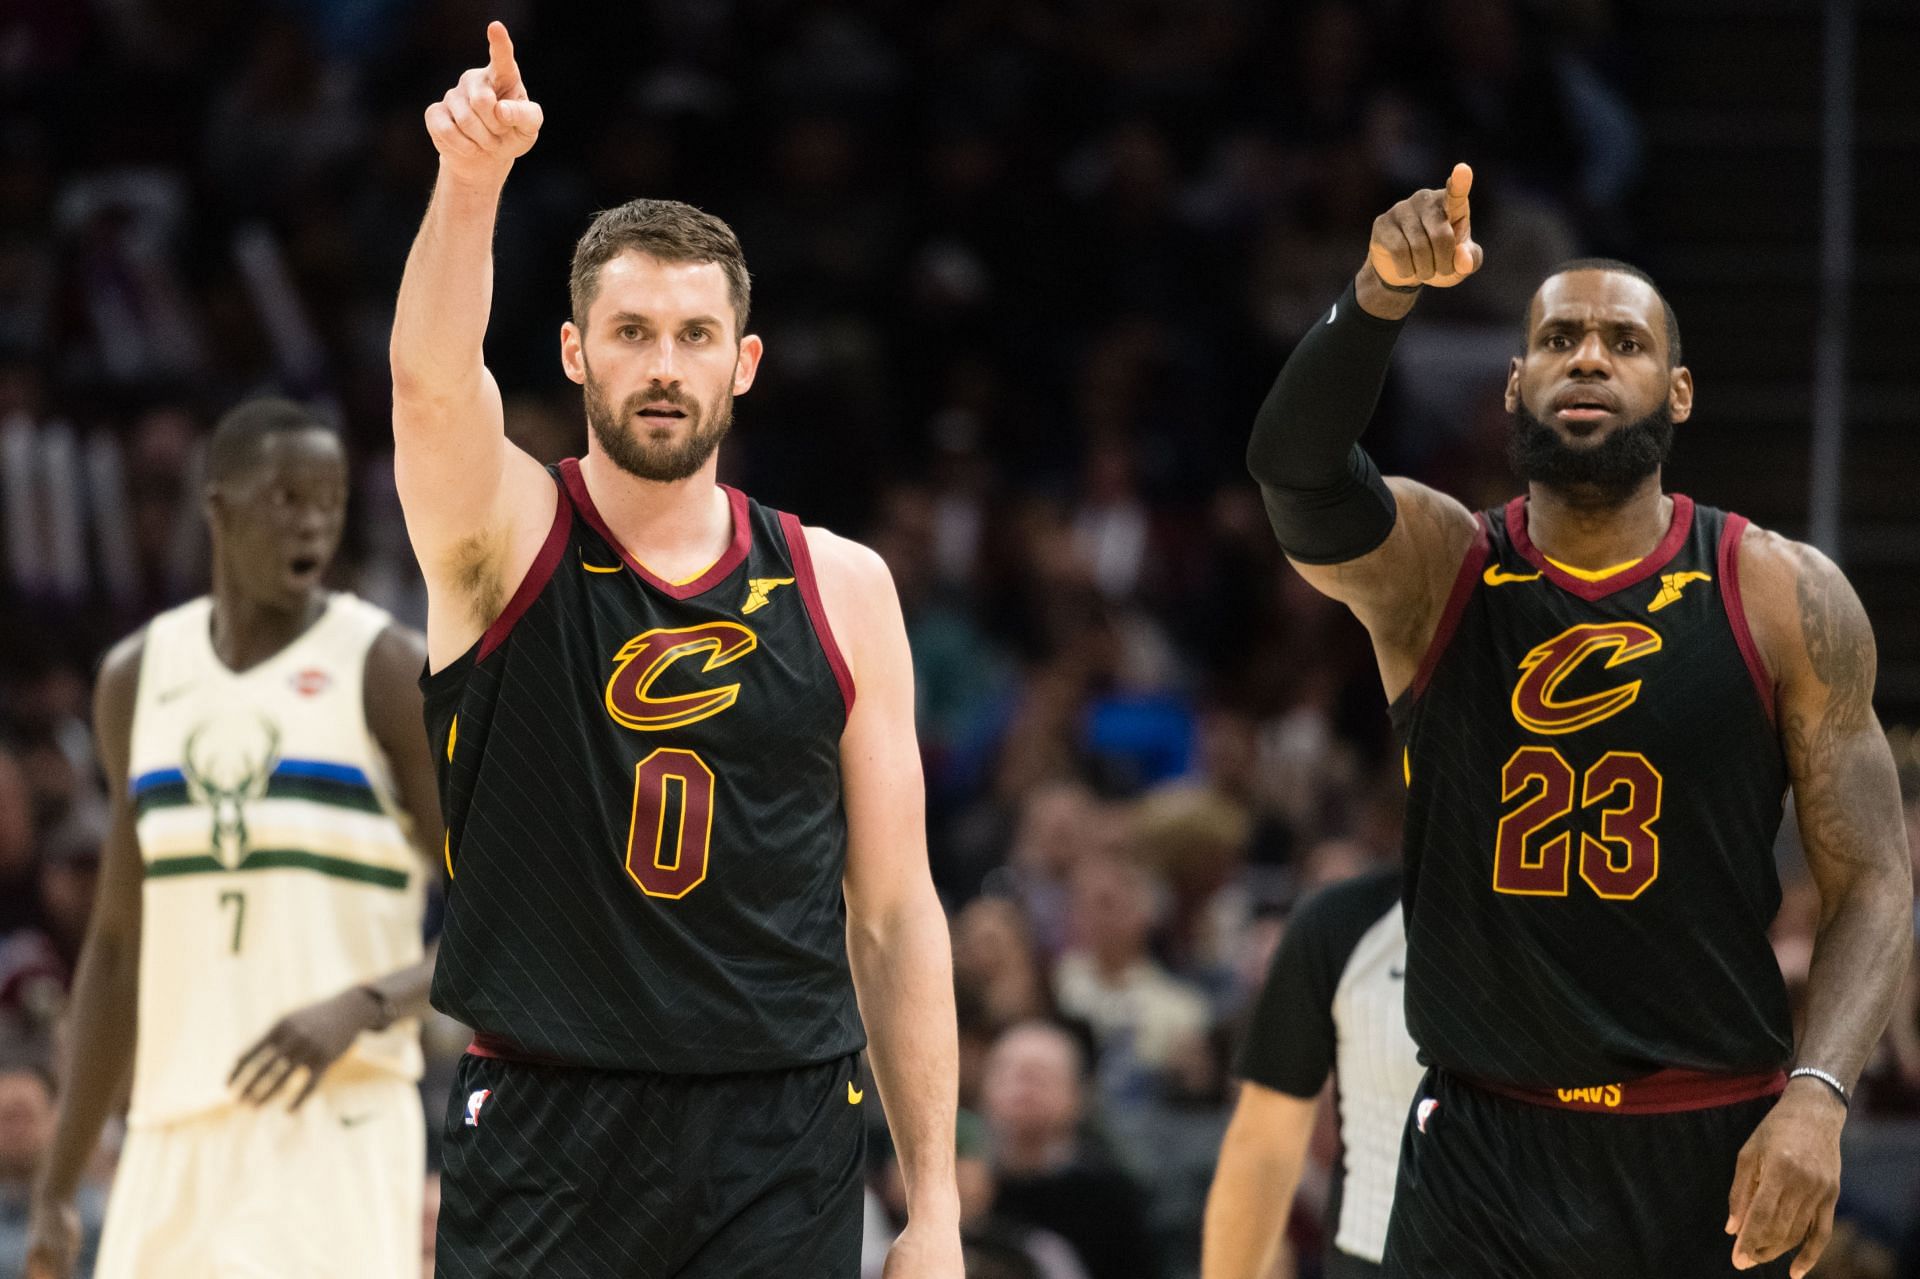 LeBron James and Kevin Love won a championship together with the Cleveland Cavaliers